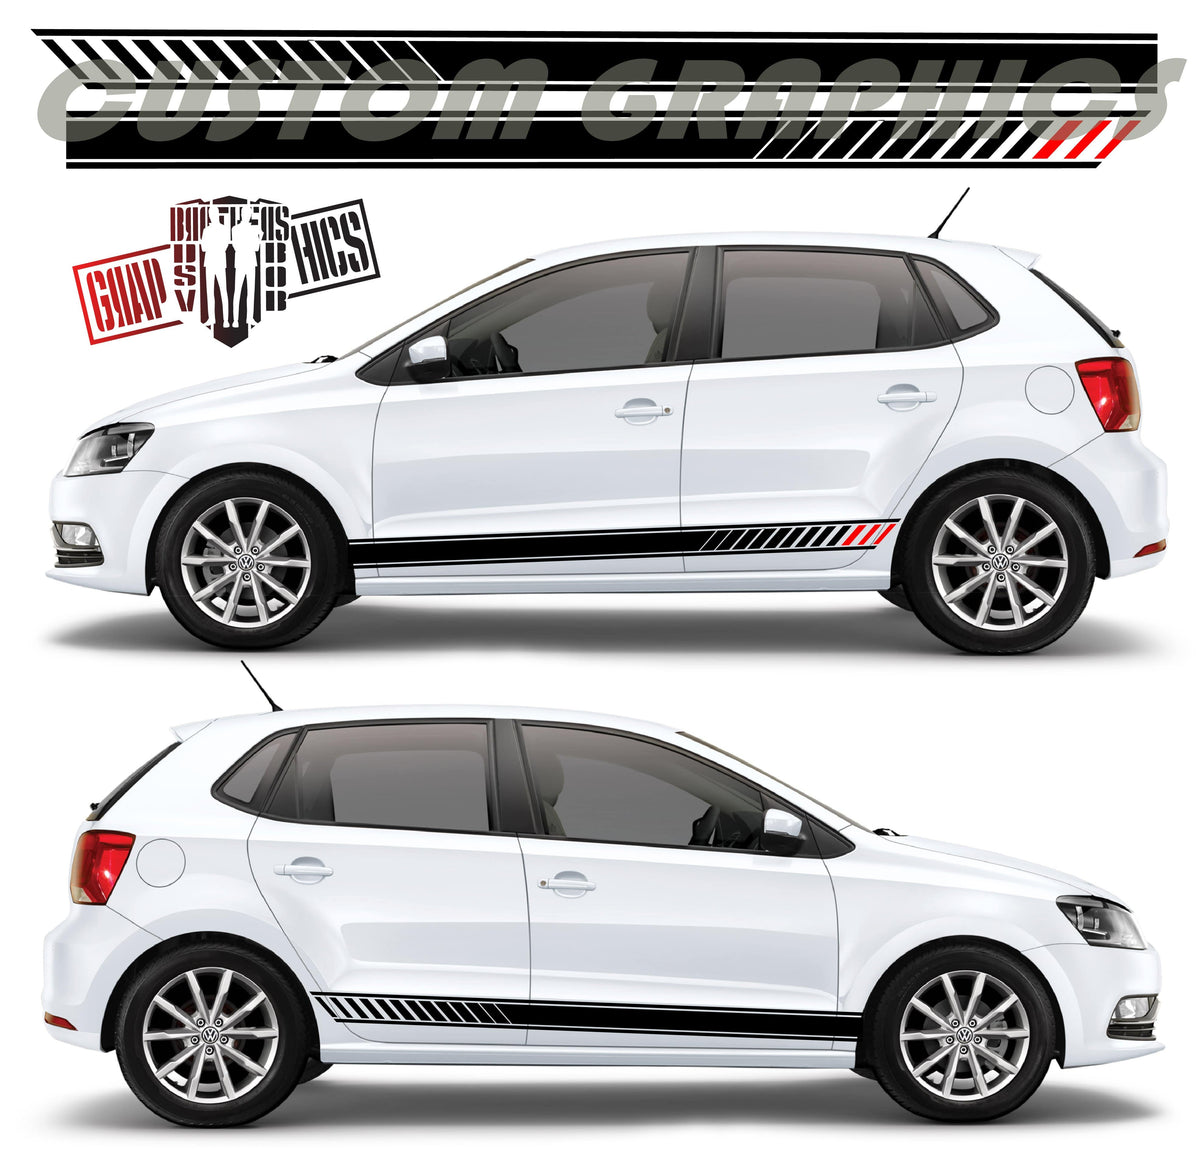 NEW CLASSIC design decal vinyl decal Compatible with VW Polo gift car